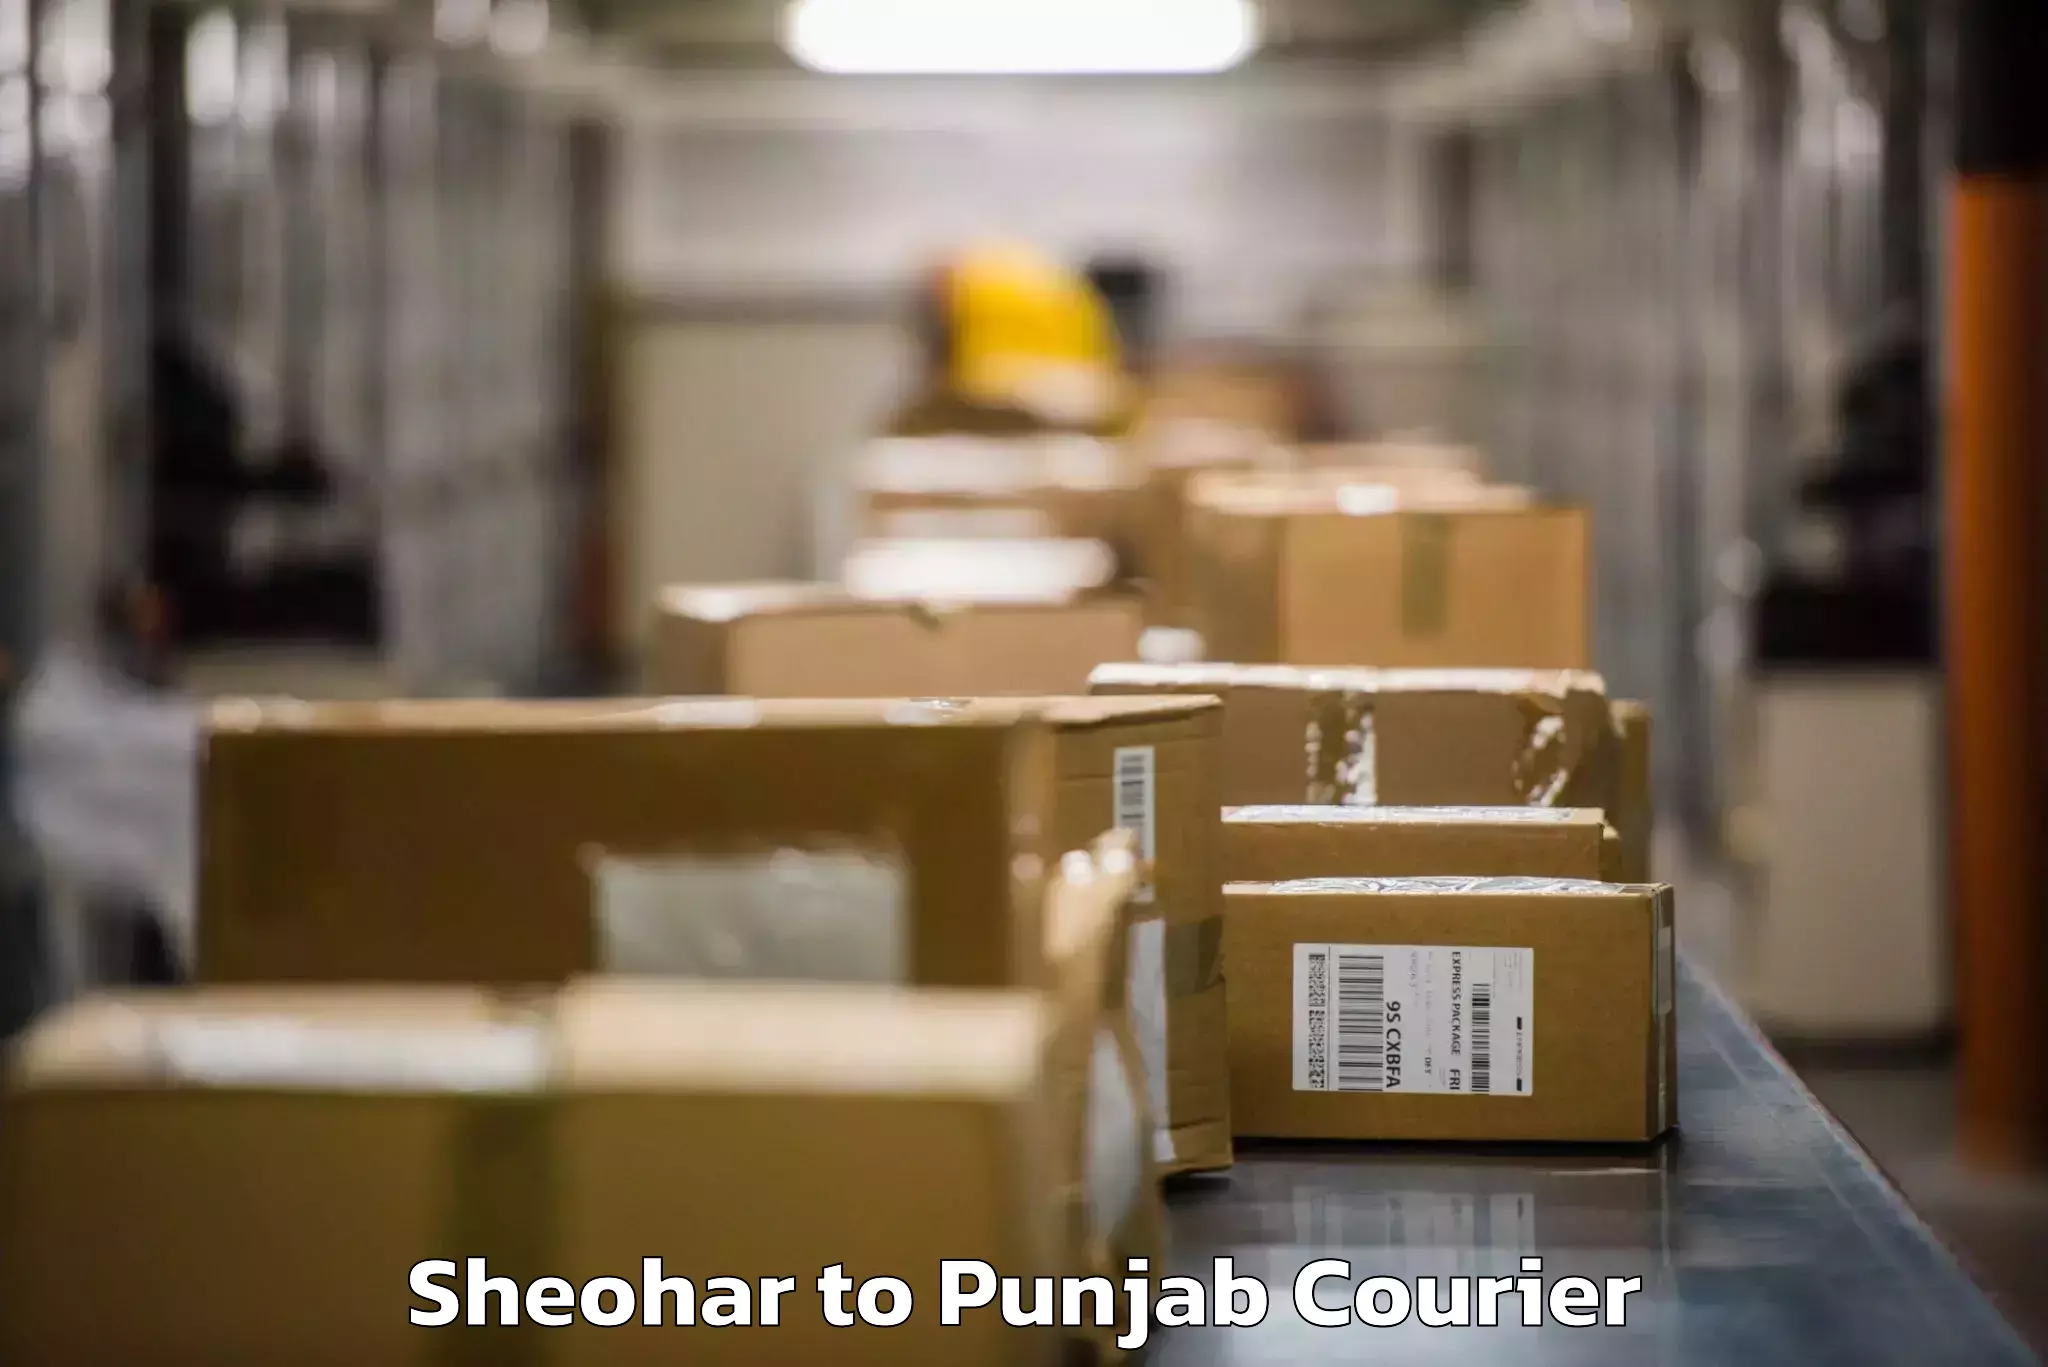 Baggage relocation service Sheohar to Pathankot